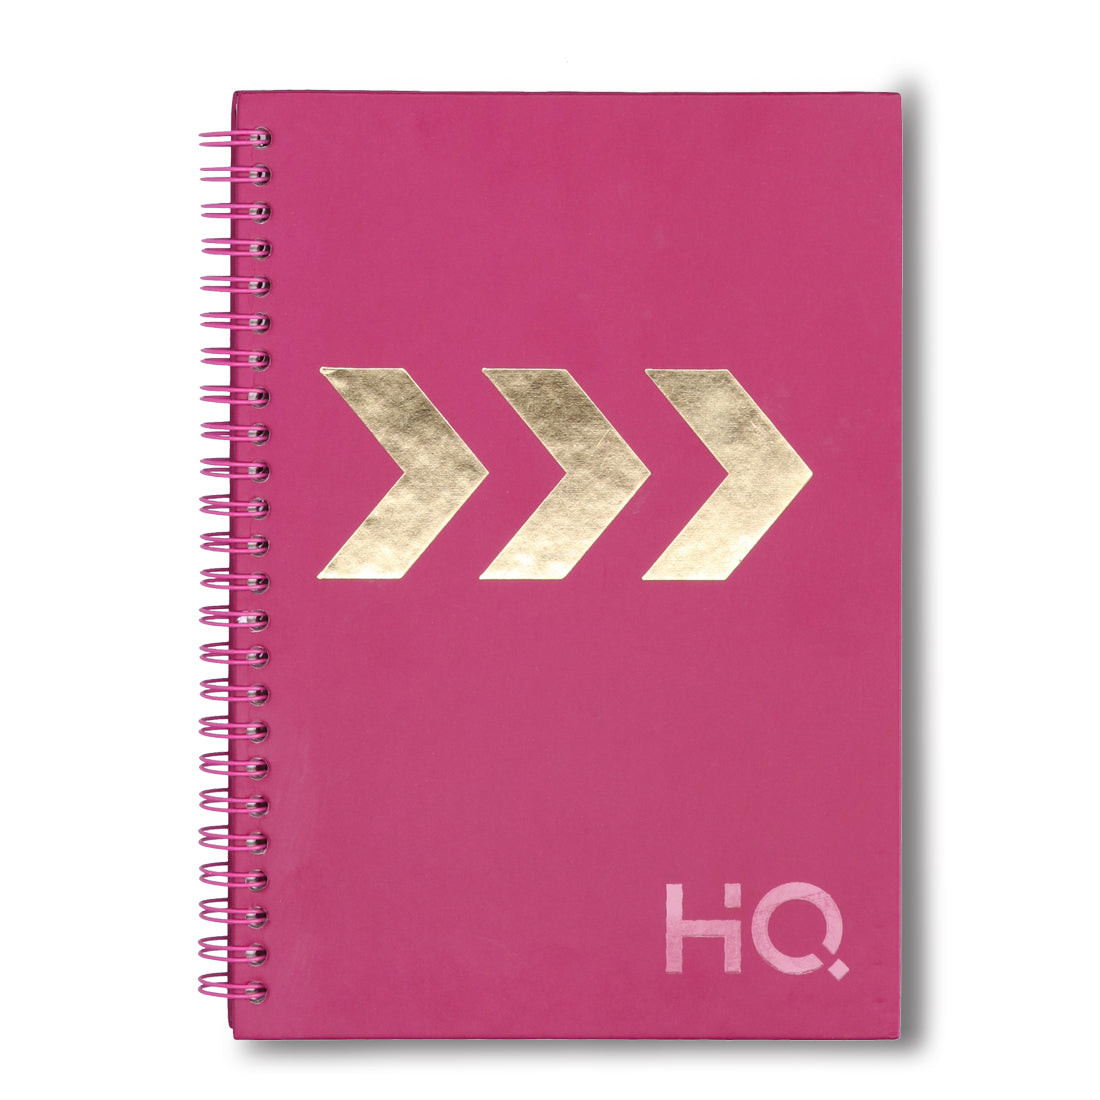 Navneet HQ | Hard Cover Notebook - Corporate Edge (Burgandy) for Office and Professional Use | Wiro Bound and Foil Stamping | Single Line | A5 Size - 21 cm x 14.8 cm | 192 Pages